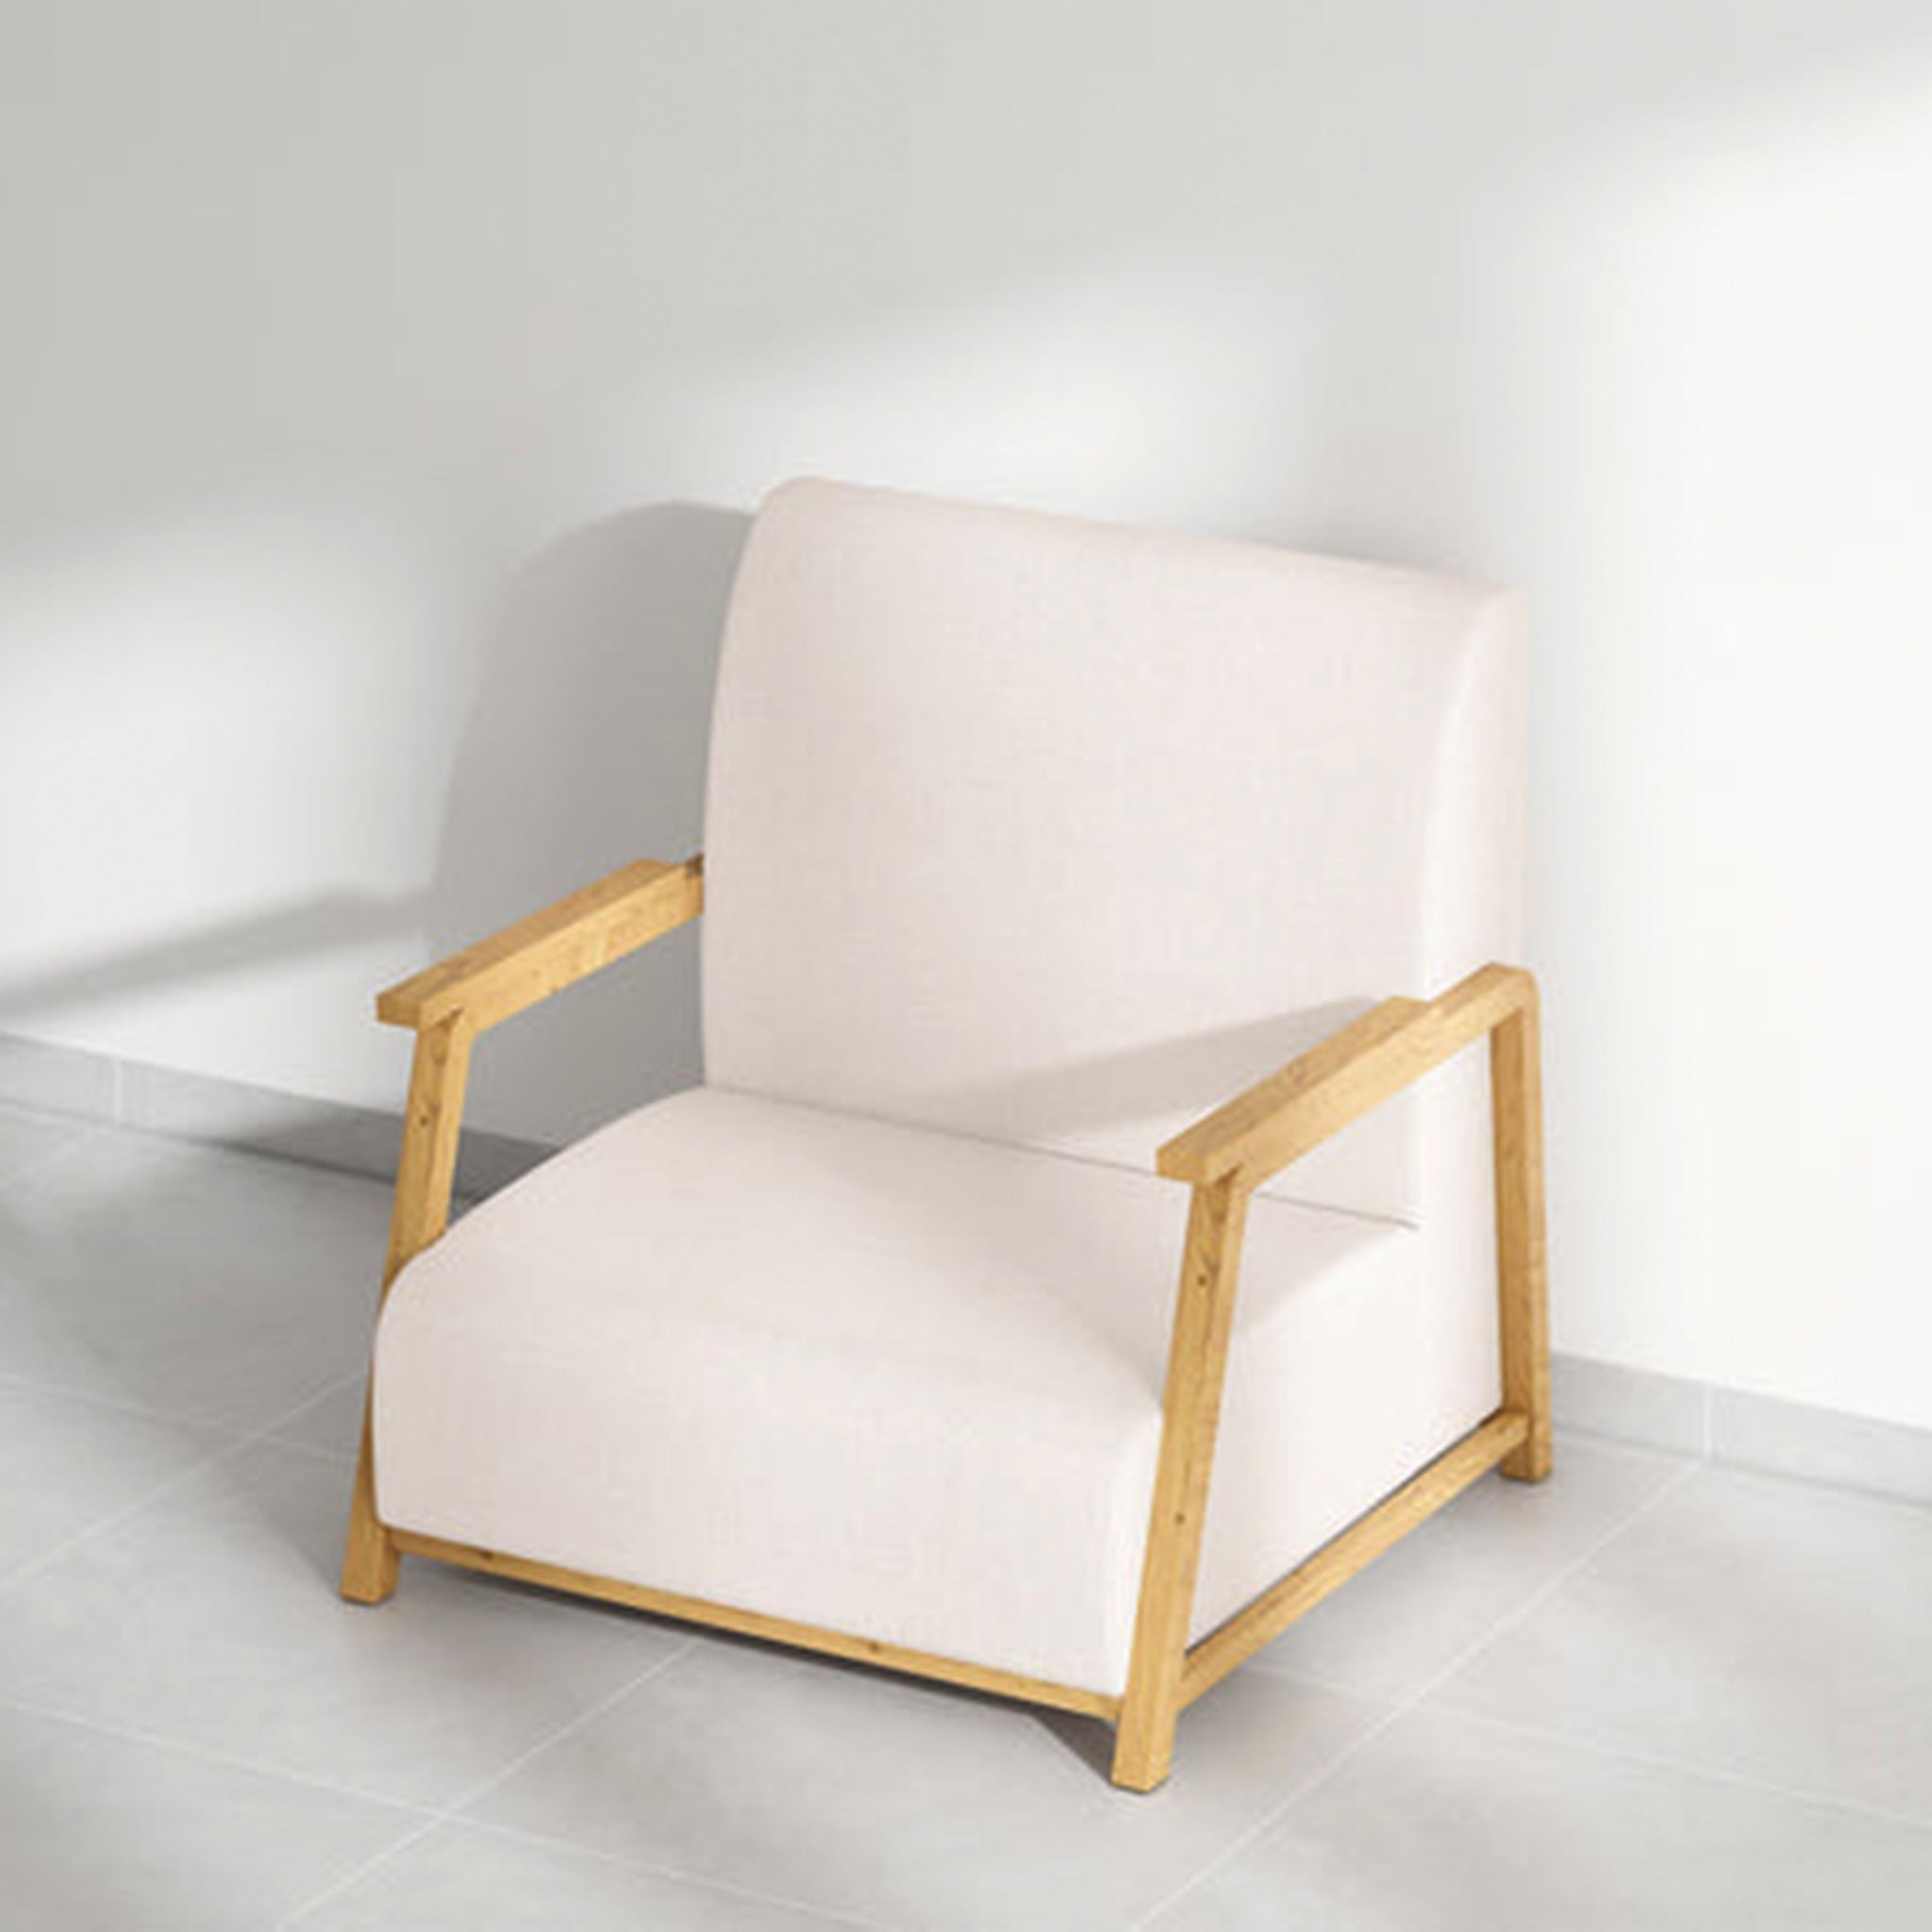 The Dixon Arm Accent Chair with clean lines and neutral tones.